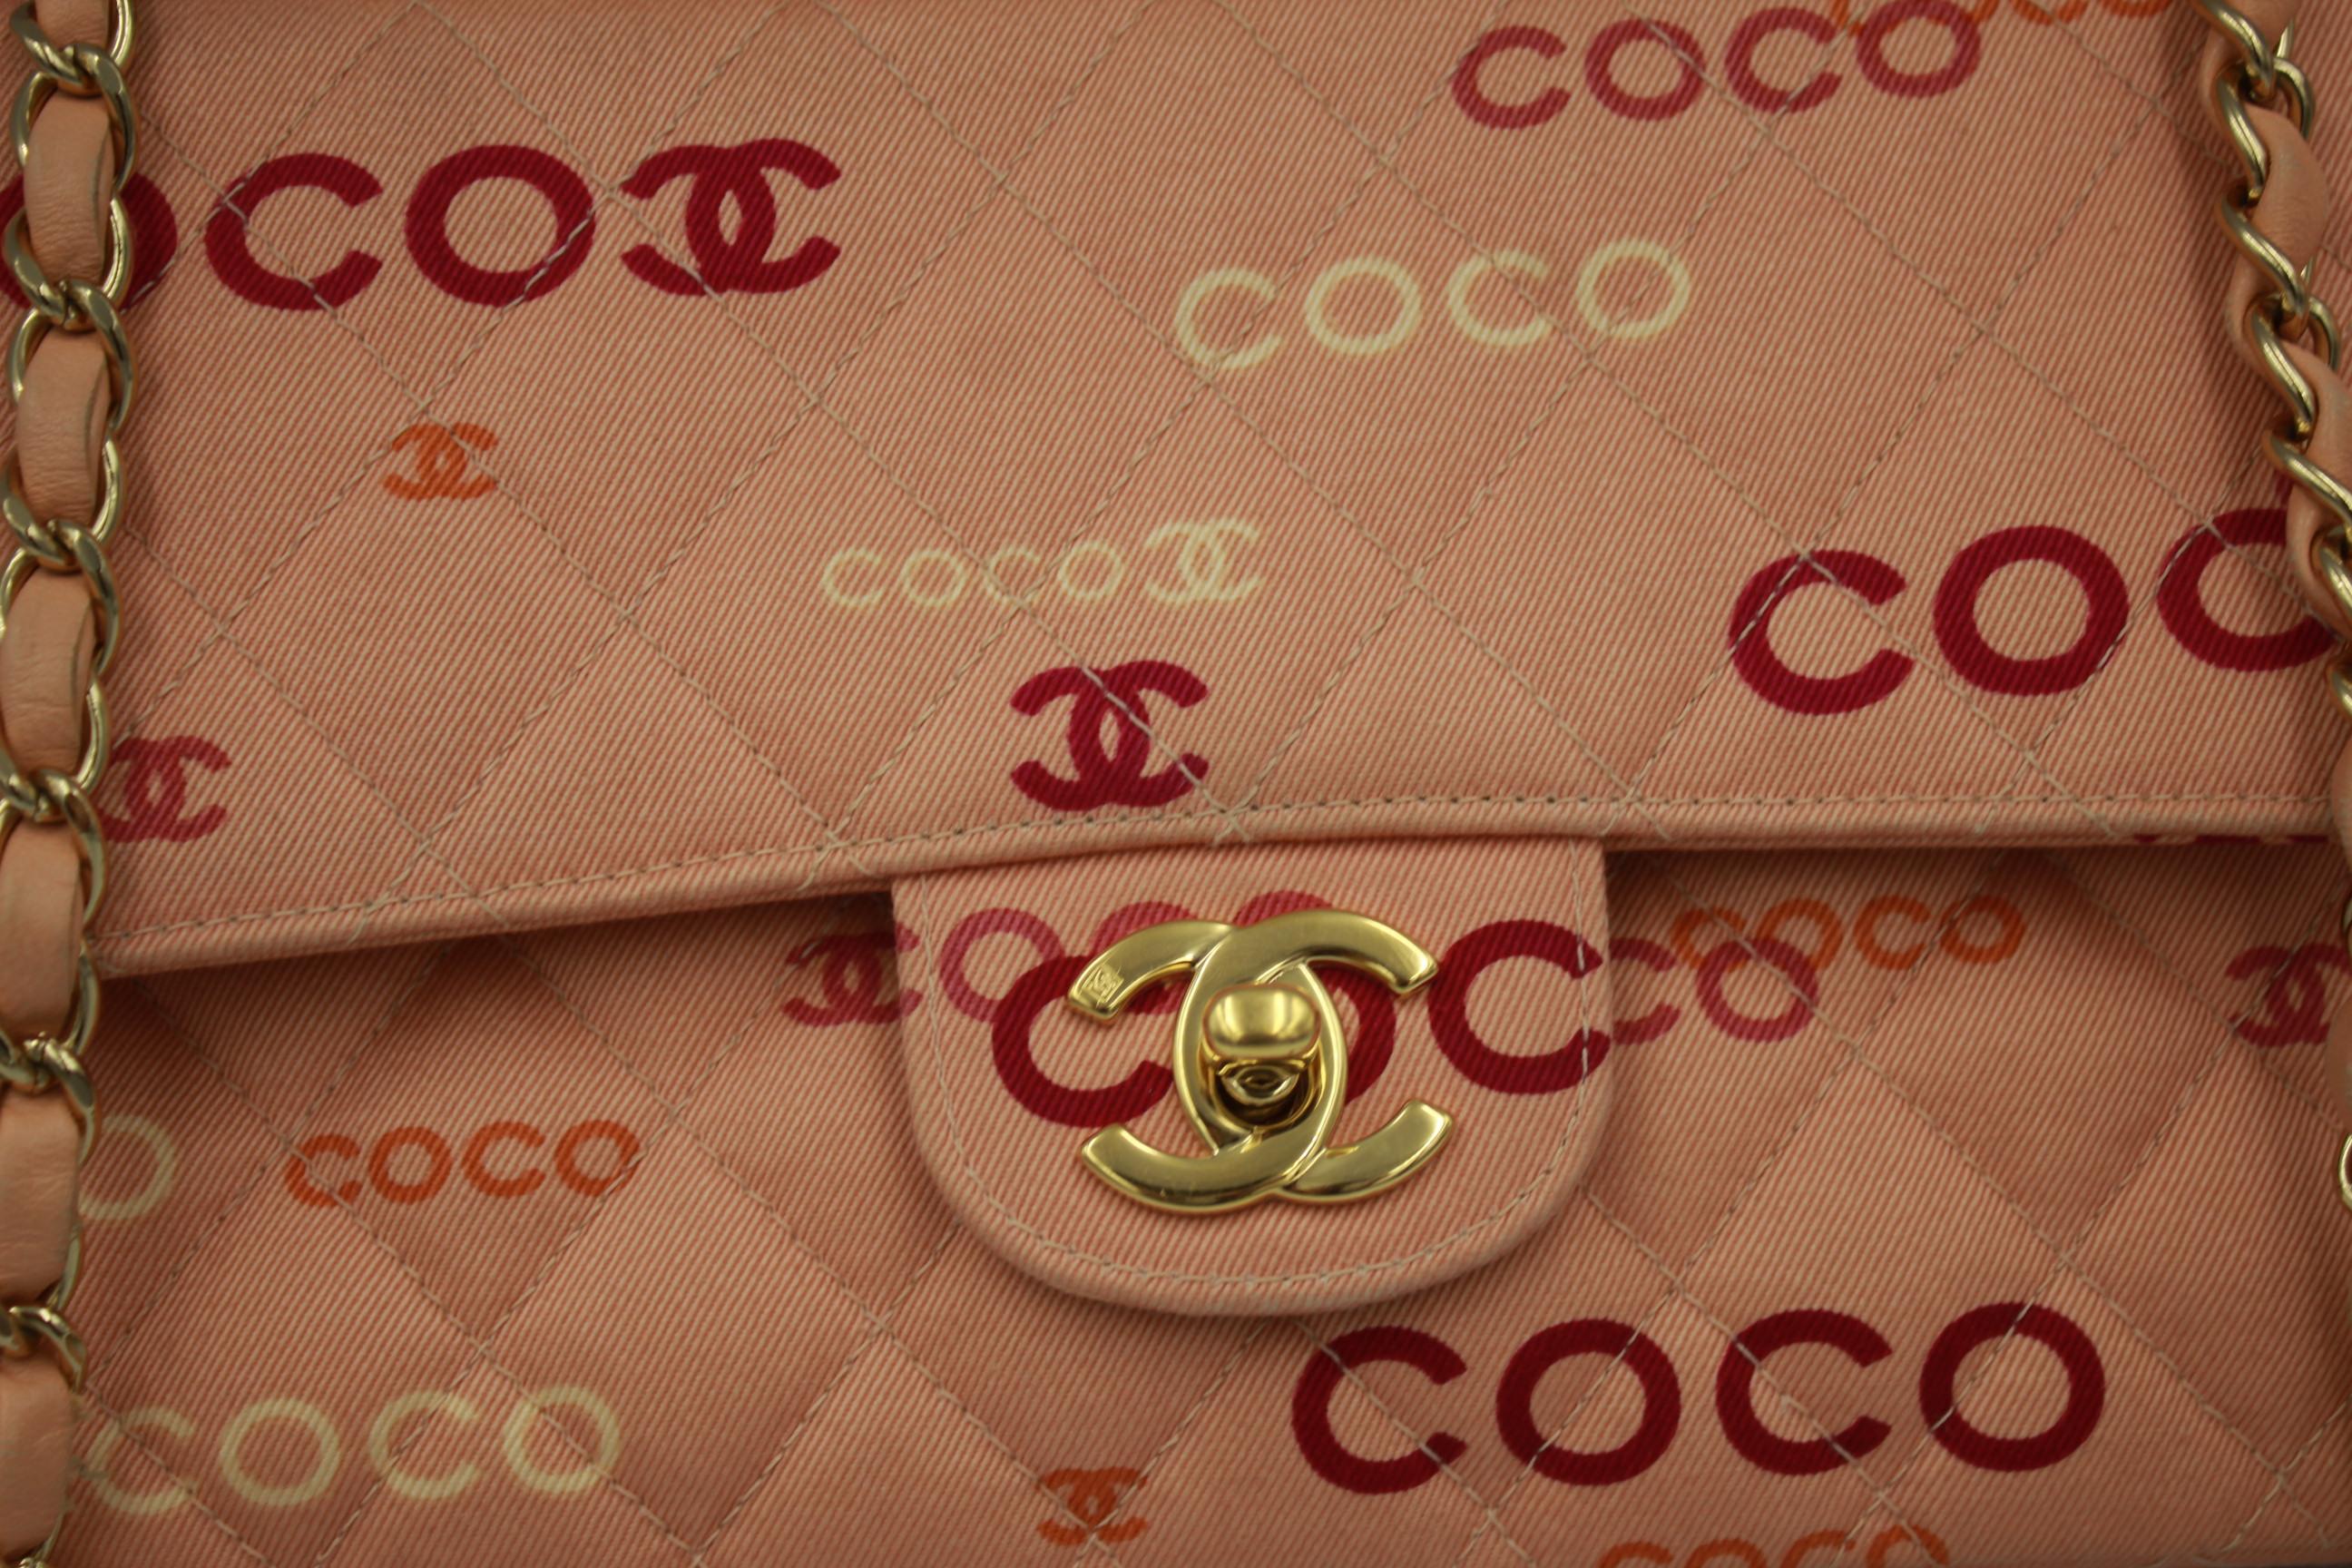 Chanel Coco Chanel pink canvas Timeless.
Good condition, some light signs of wear in the canvas. 
Size 25x15
With card
